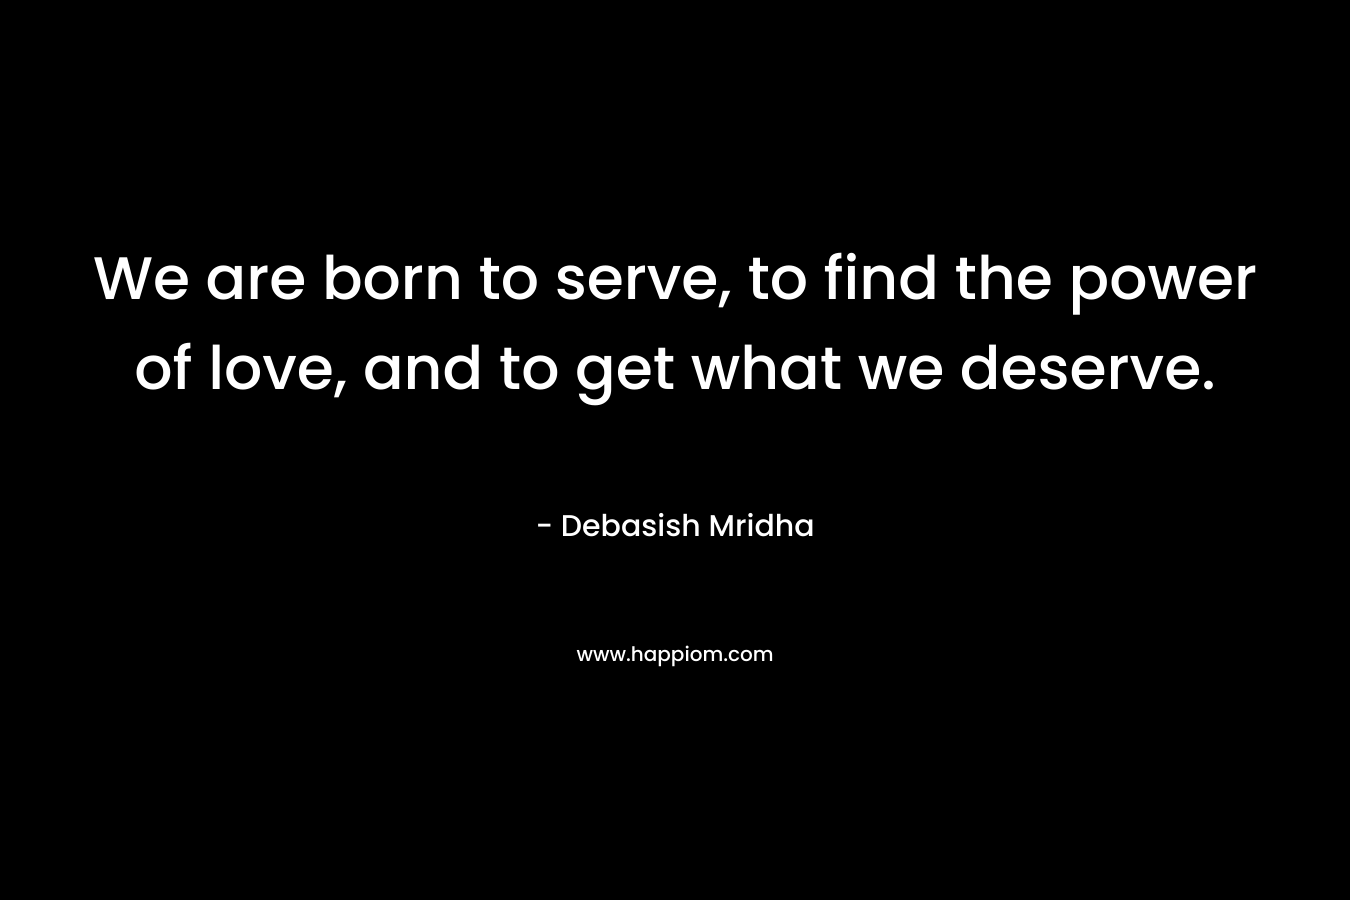 We are born to serve, to find the power of love, and to get what we deserve.